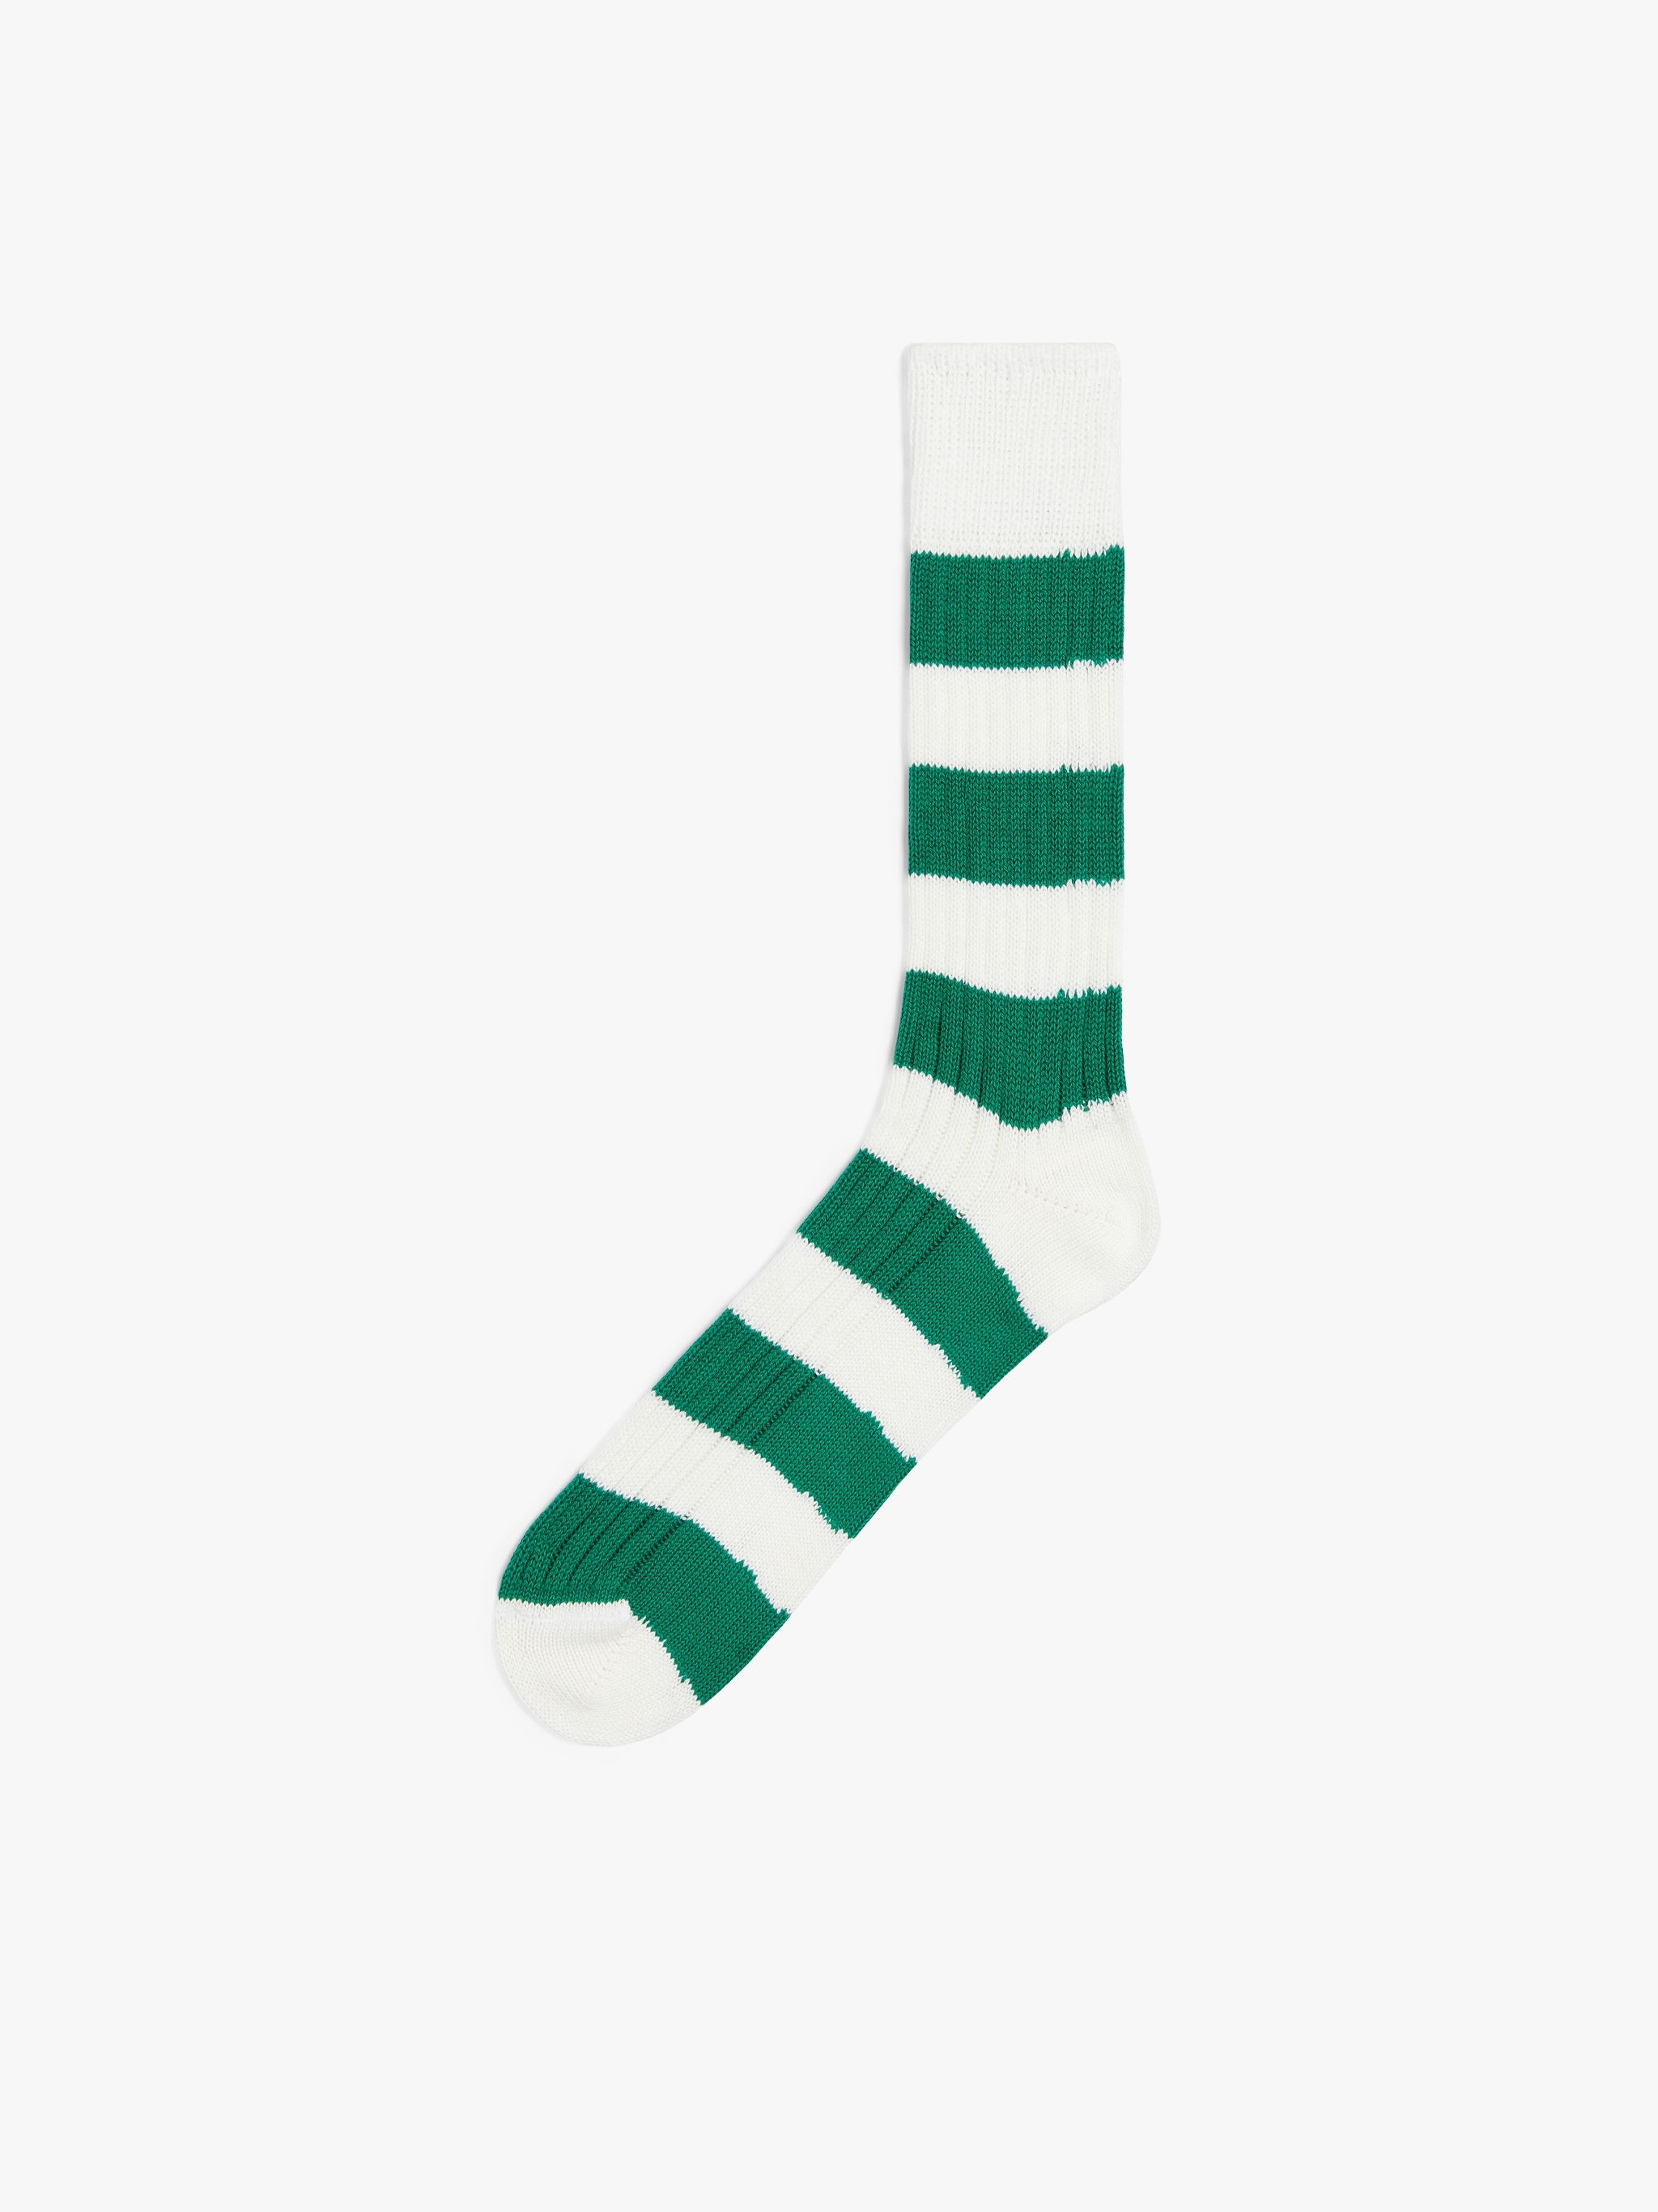 GREEN AND WHITE STRIPED COTTON SOCKS - 1